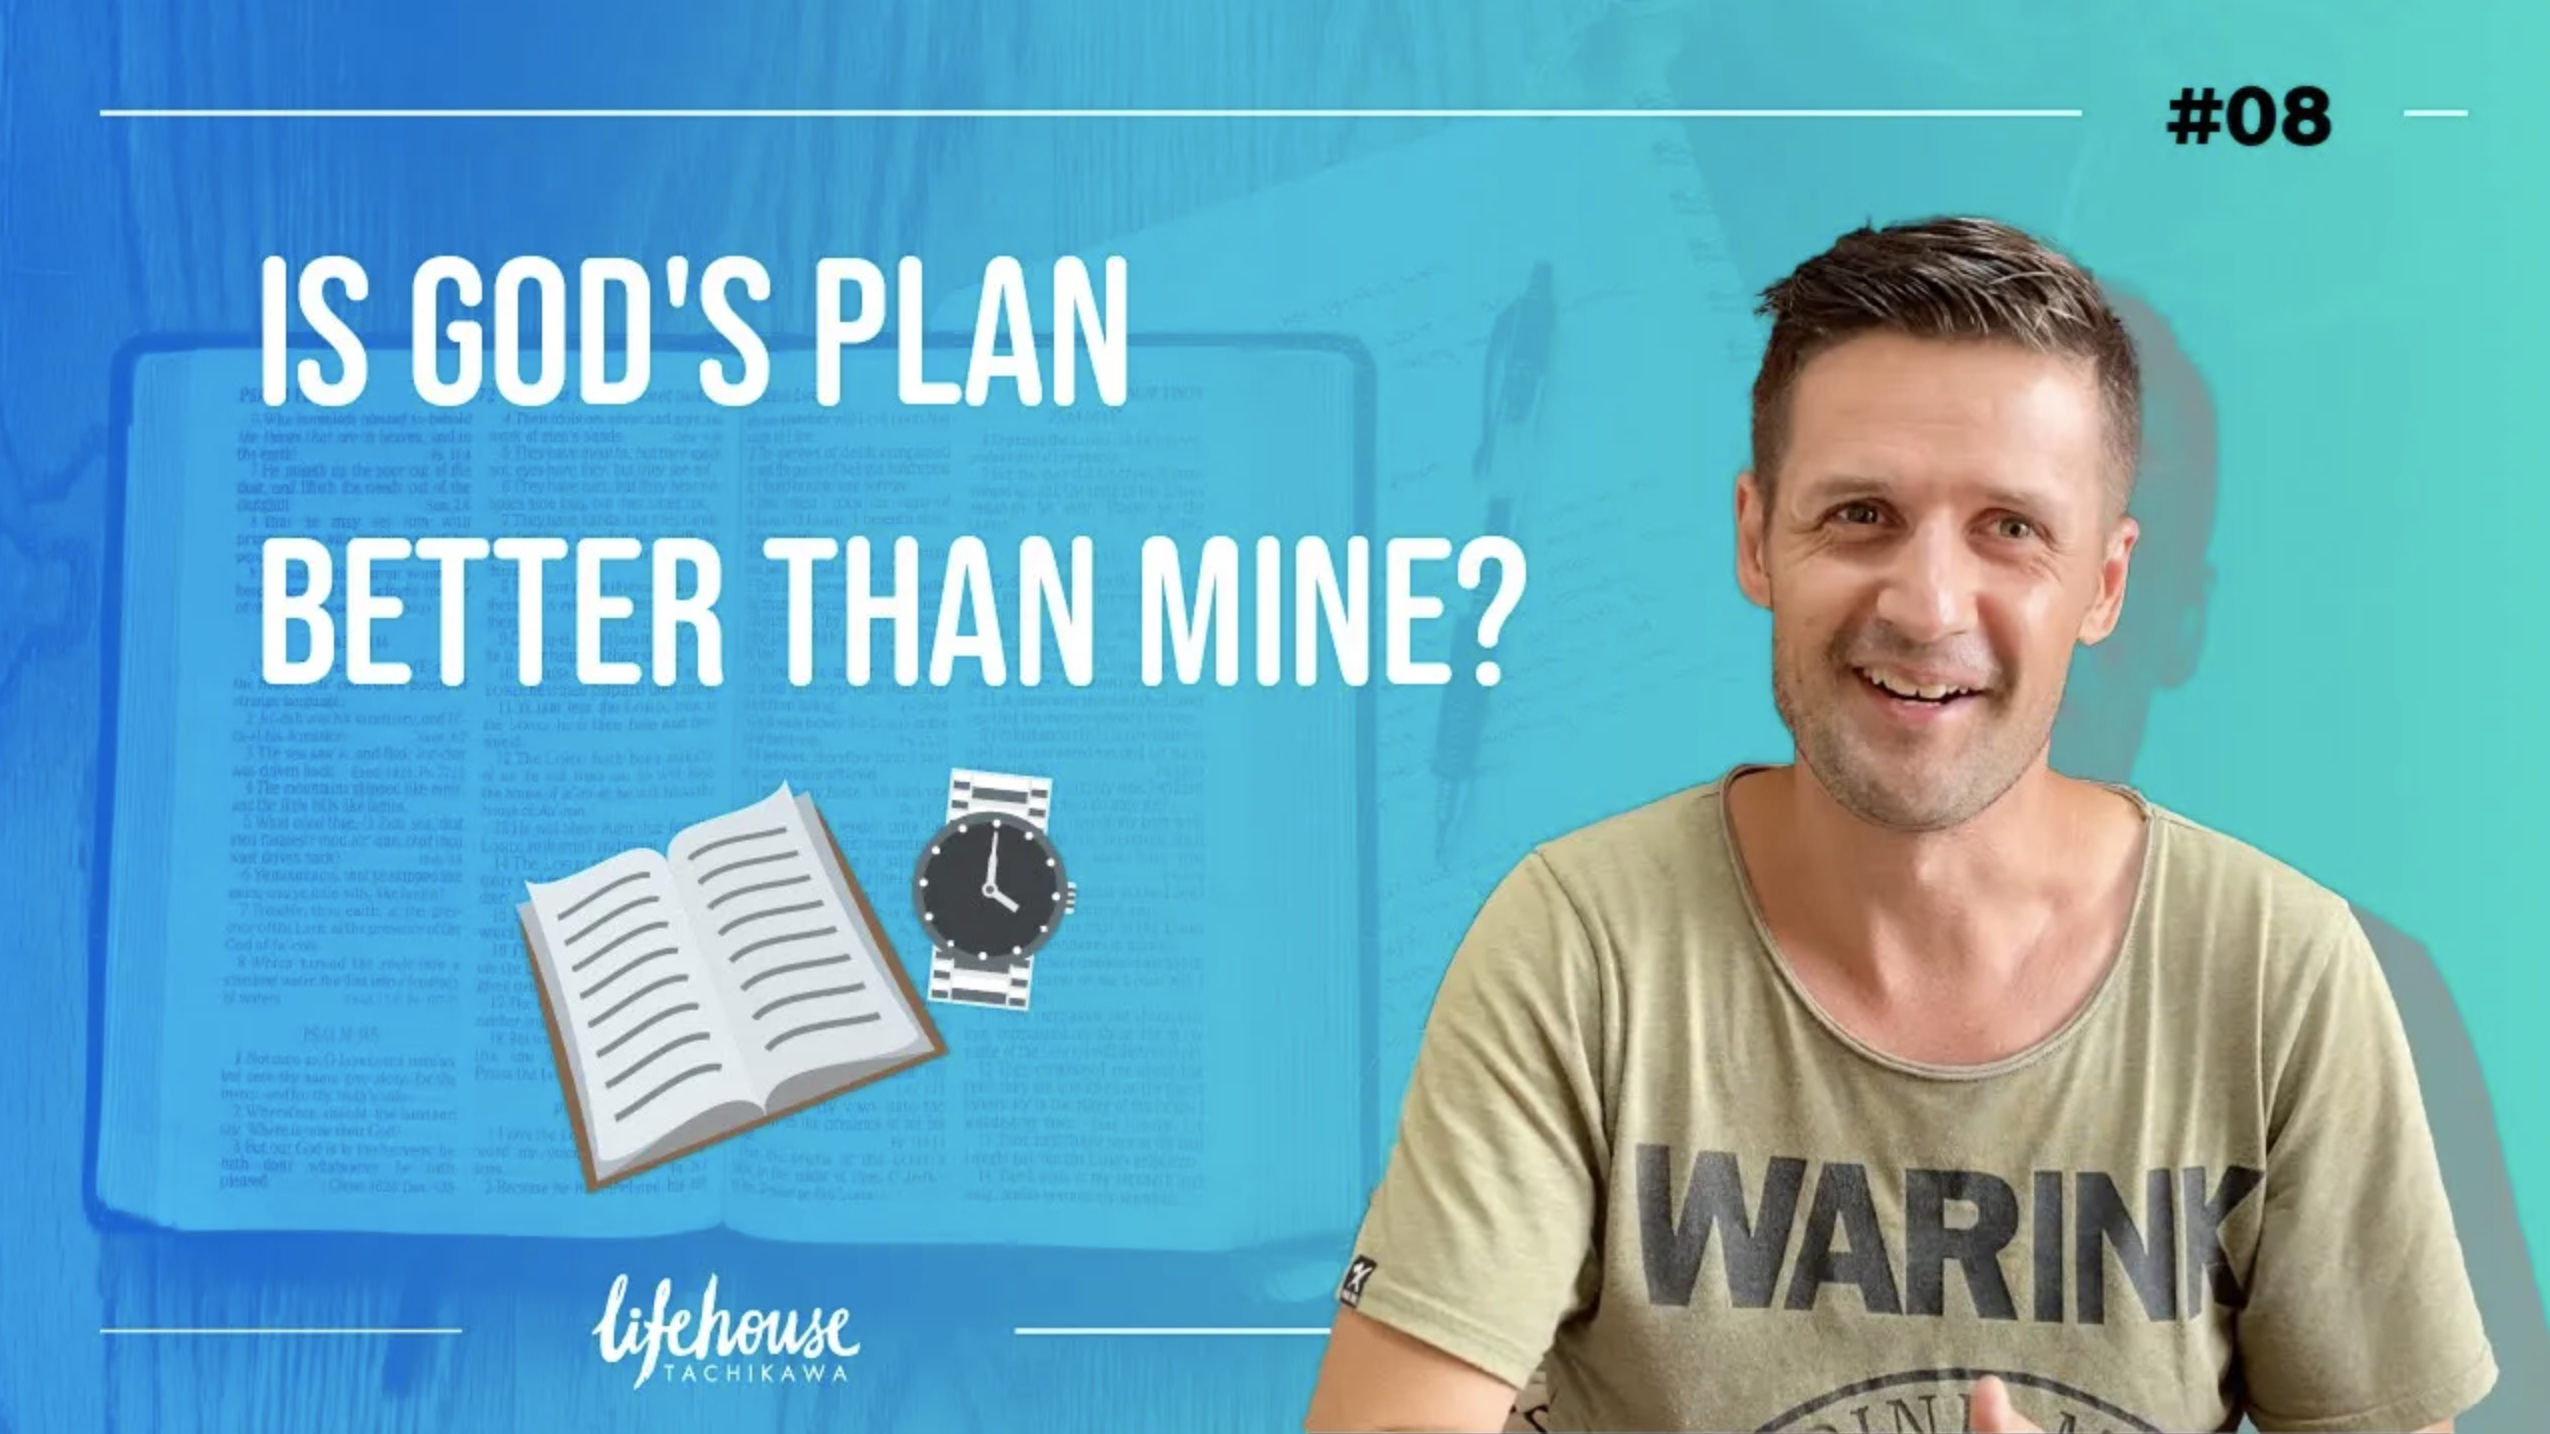 Featured image for “Journal #8: Is God’s plan better than mine?”